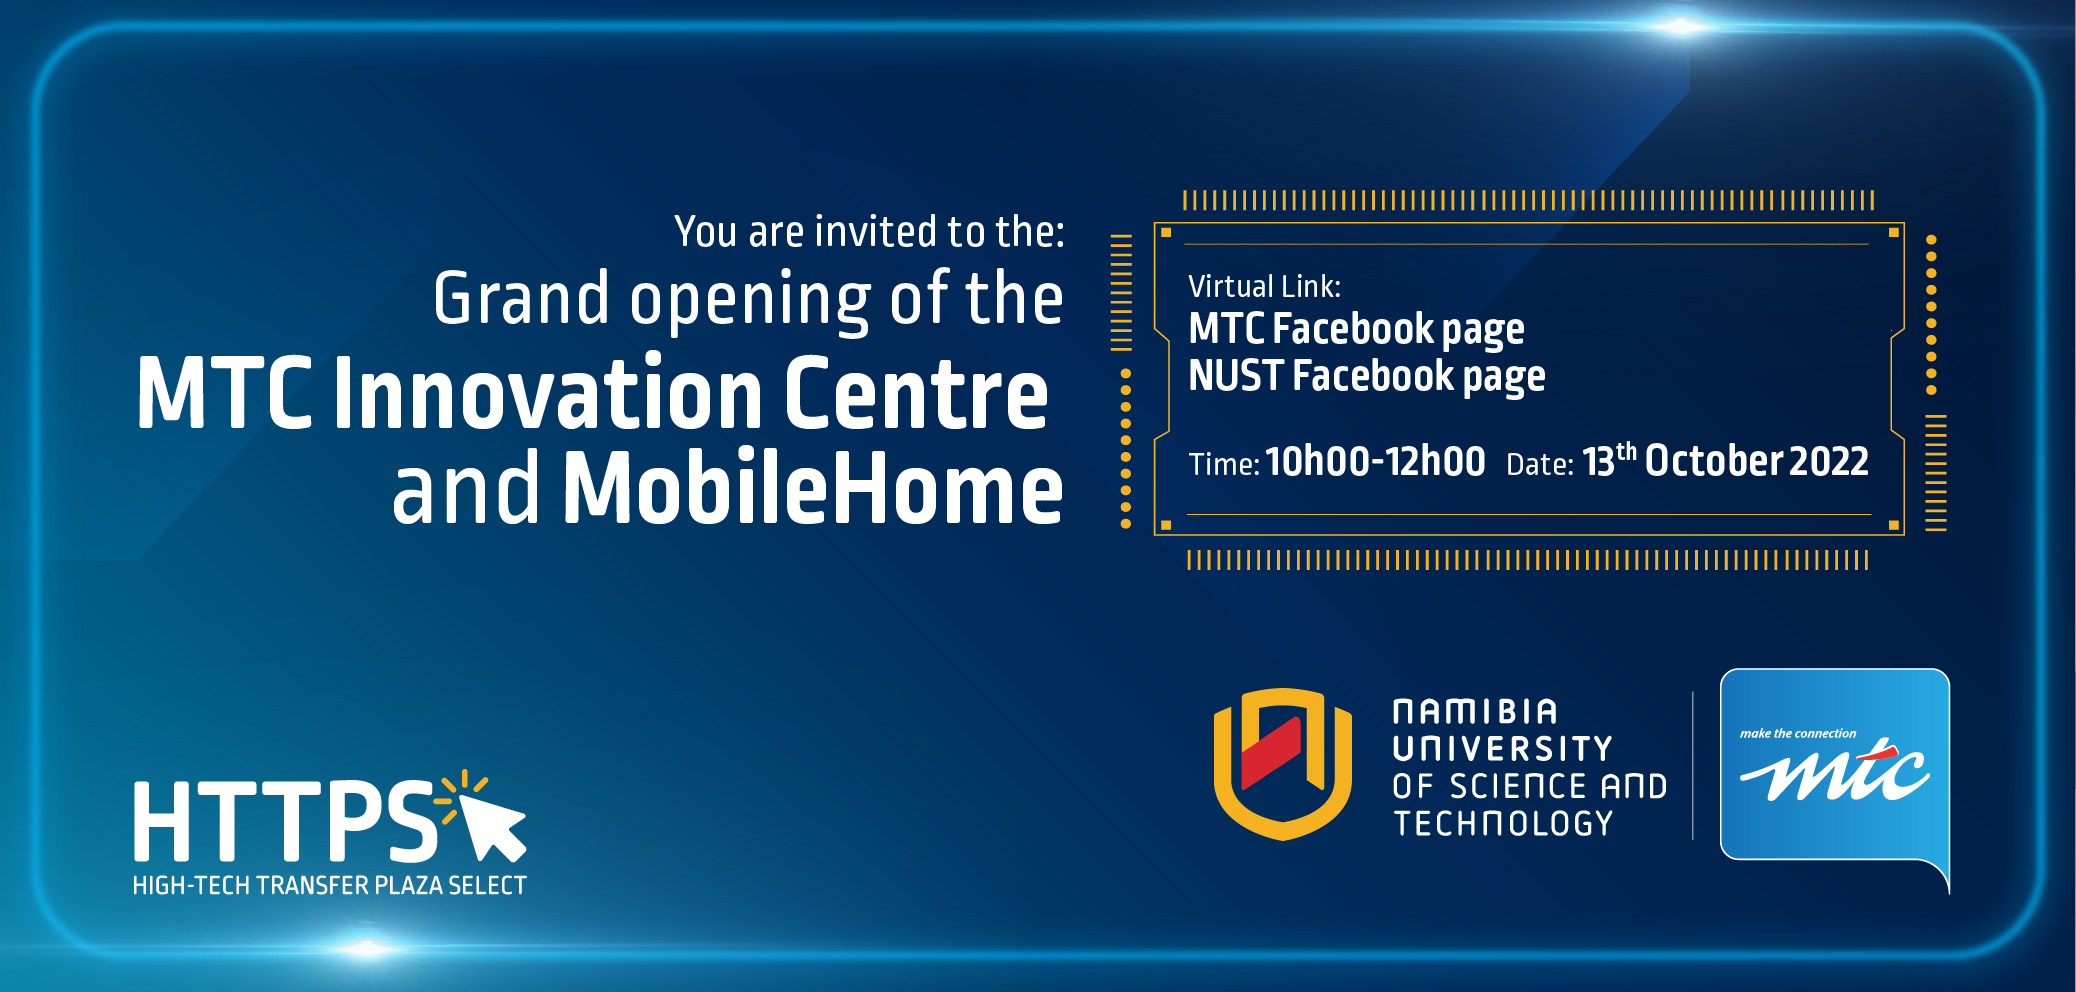 Grand opening of the MTC Innovation Centre and MobileHome